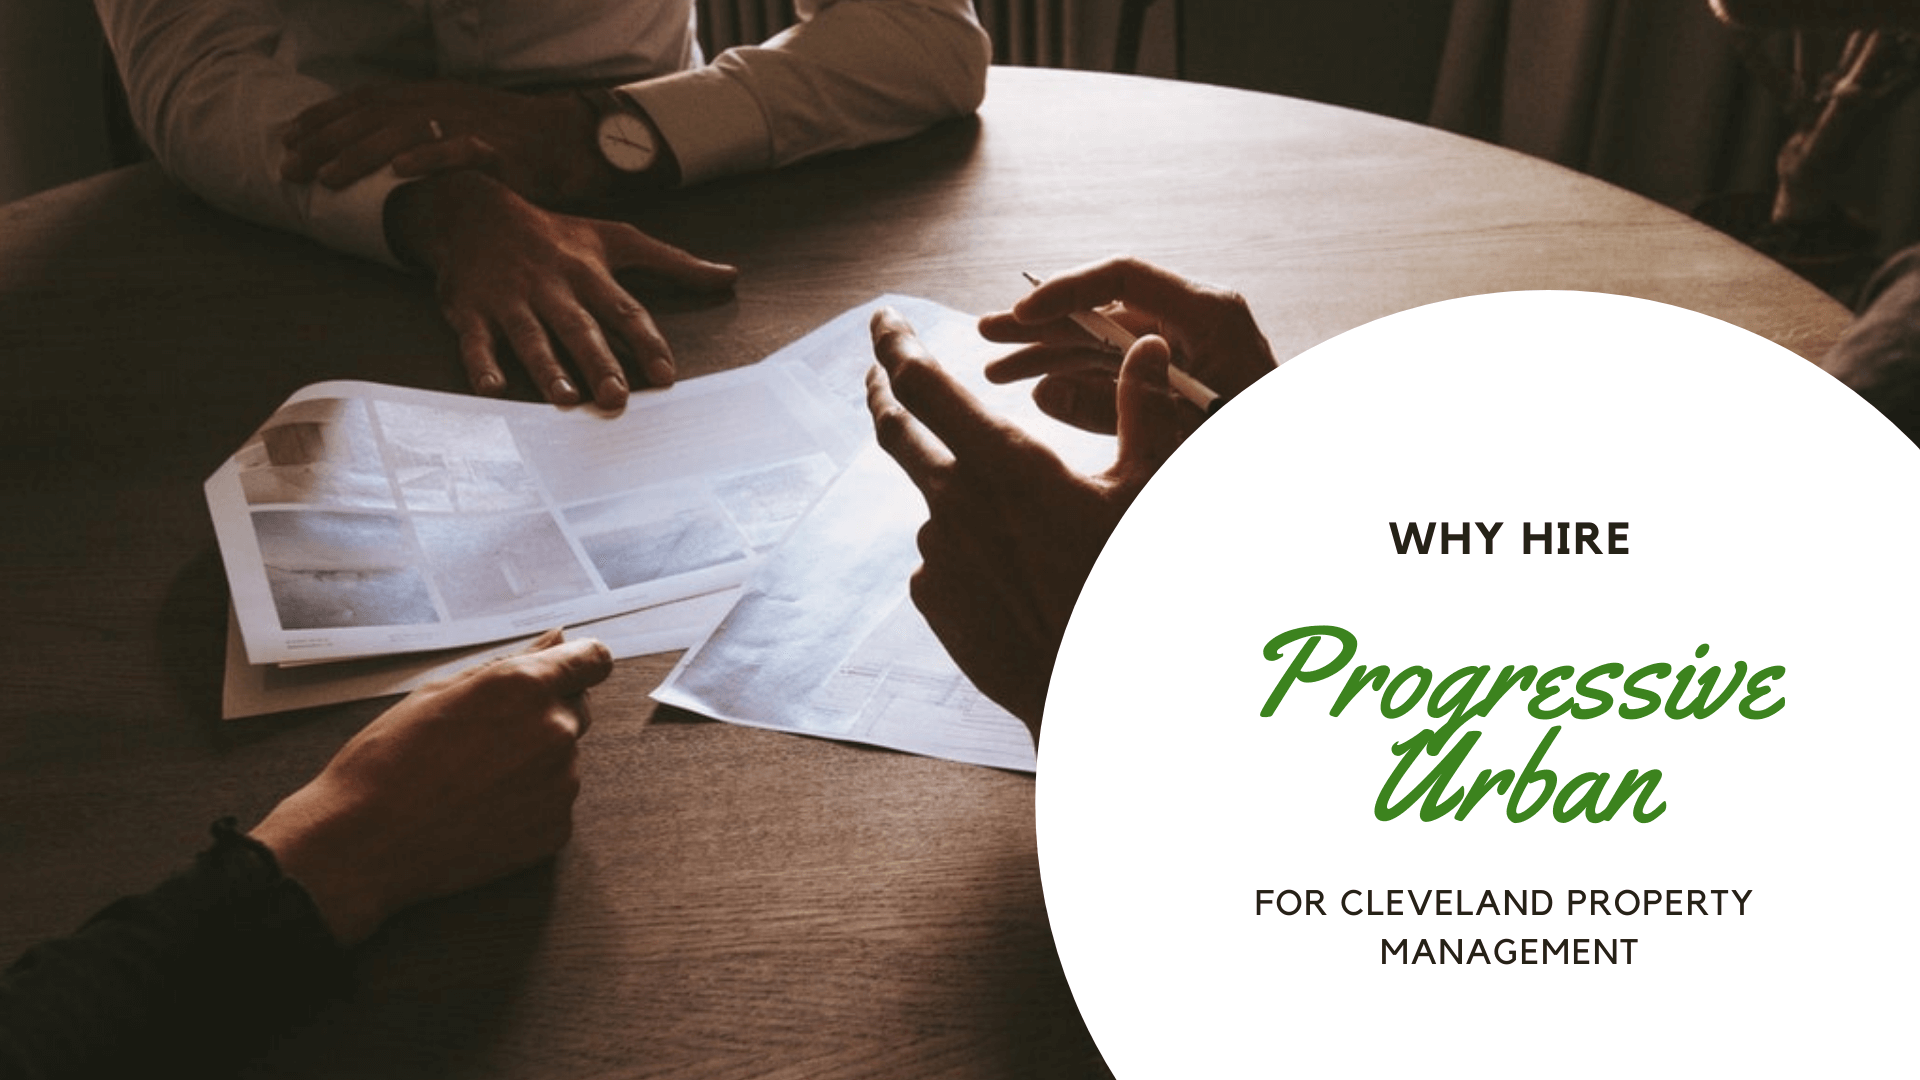 Why Hire Progressive Urban for Cleveland Property Management